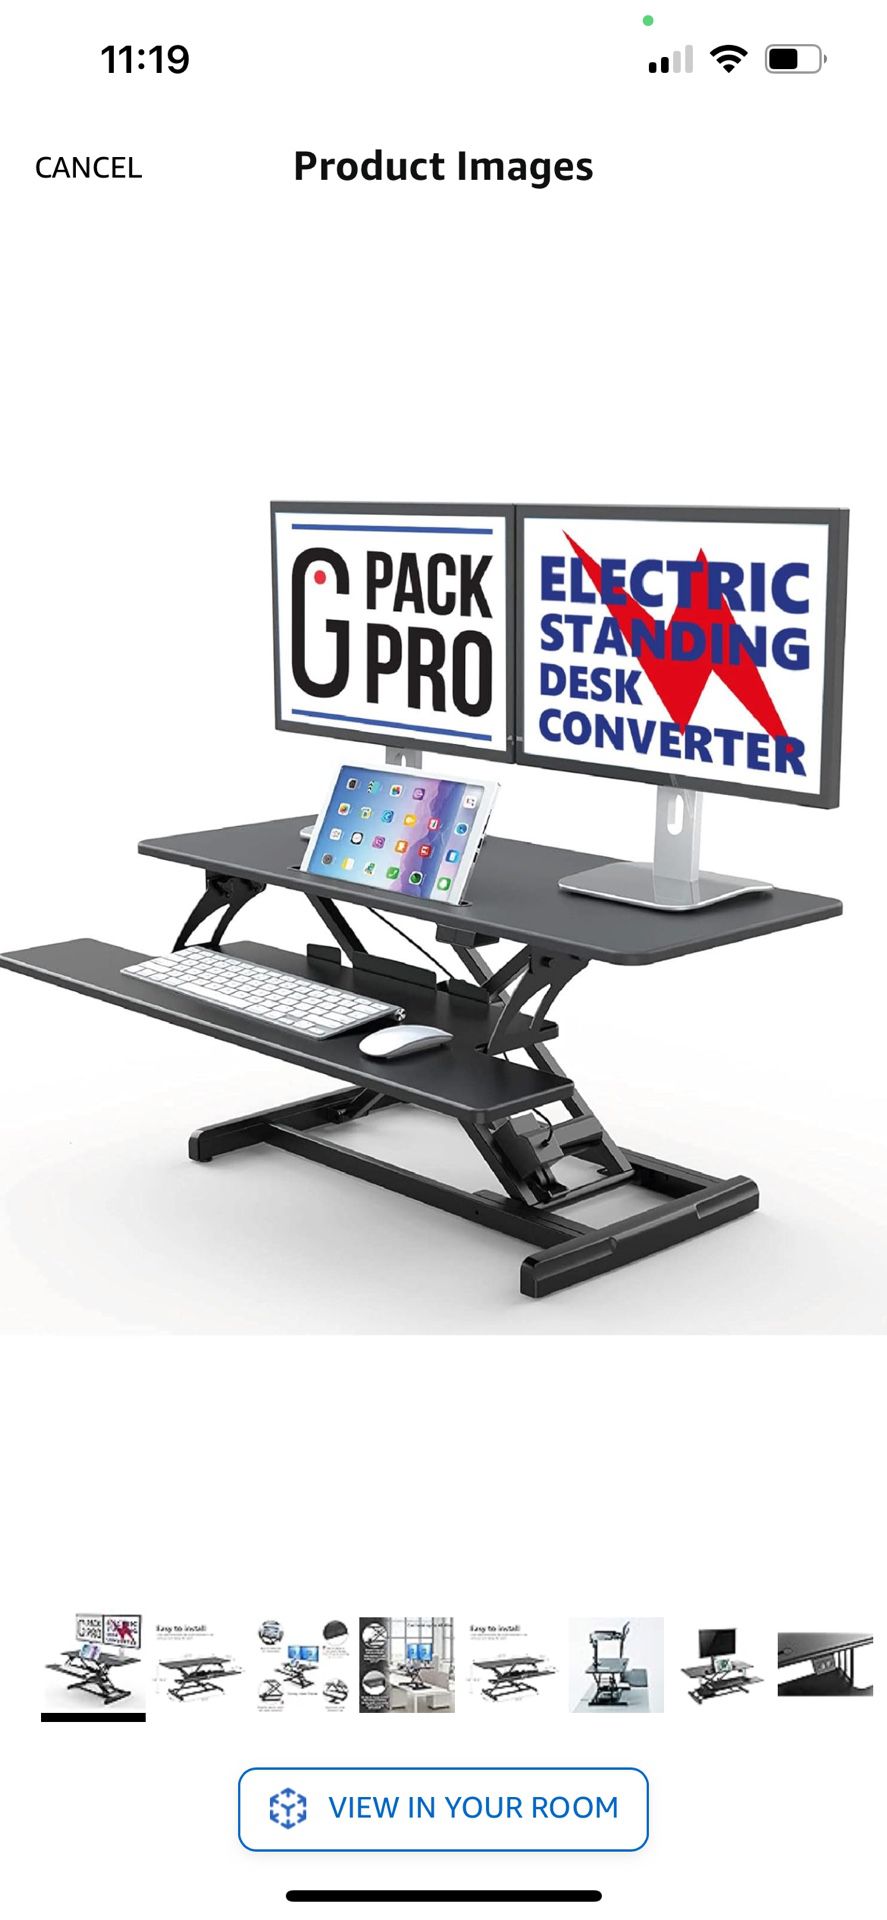 G Pack Pro Standing Desk Converter - Electric Height Adjustable Desk for Sit Stand Desk Workstation with Removable Keyword Tray and Space 